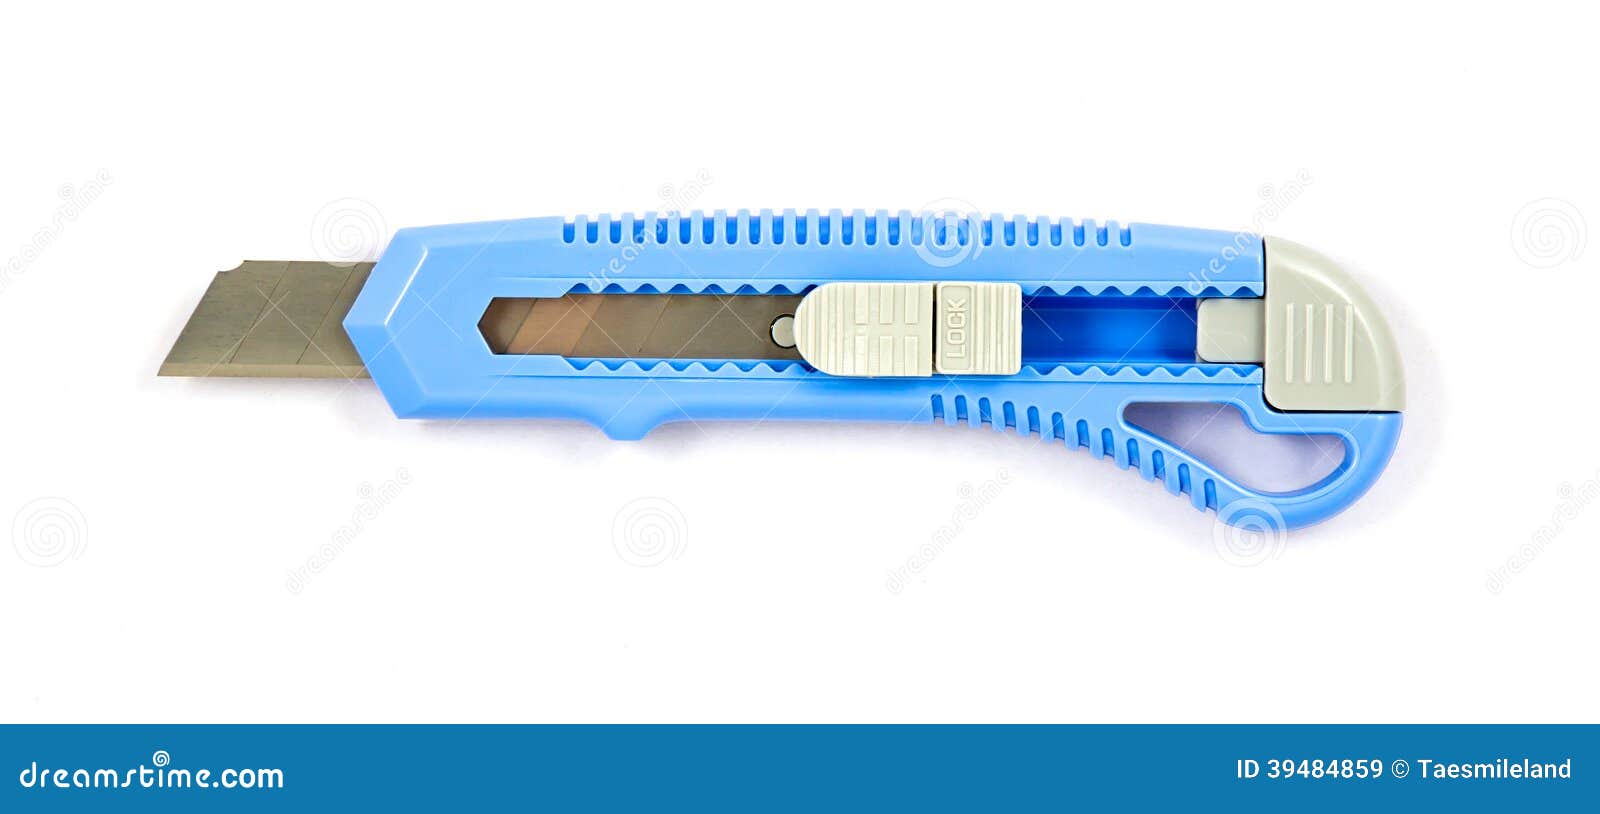 Blue box cutter isolated on white.